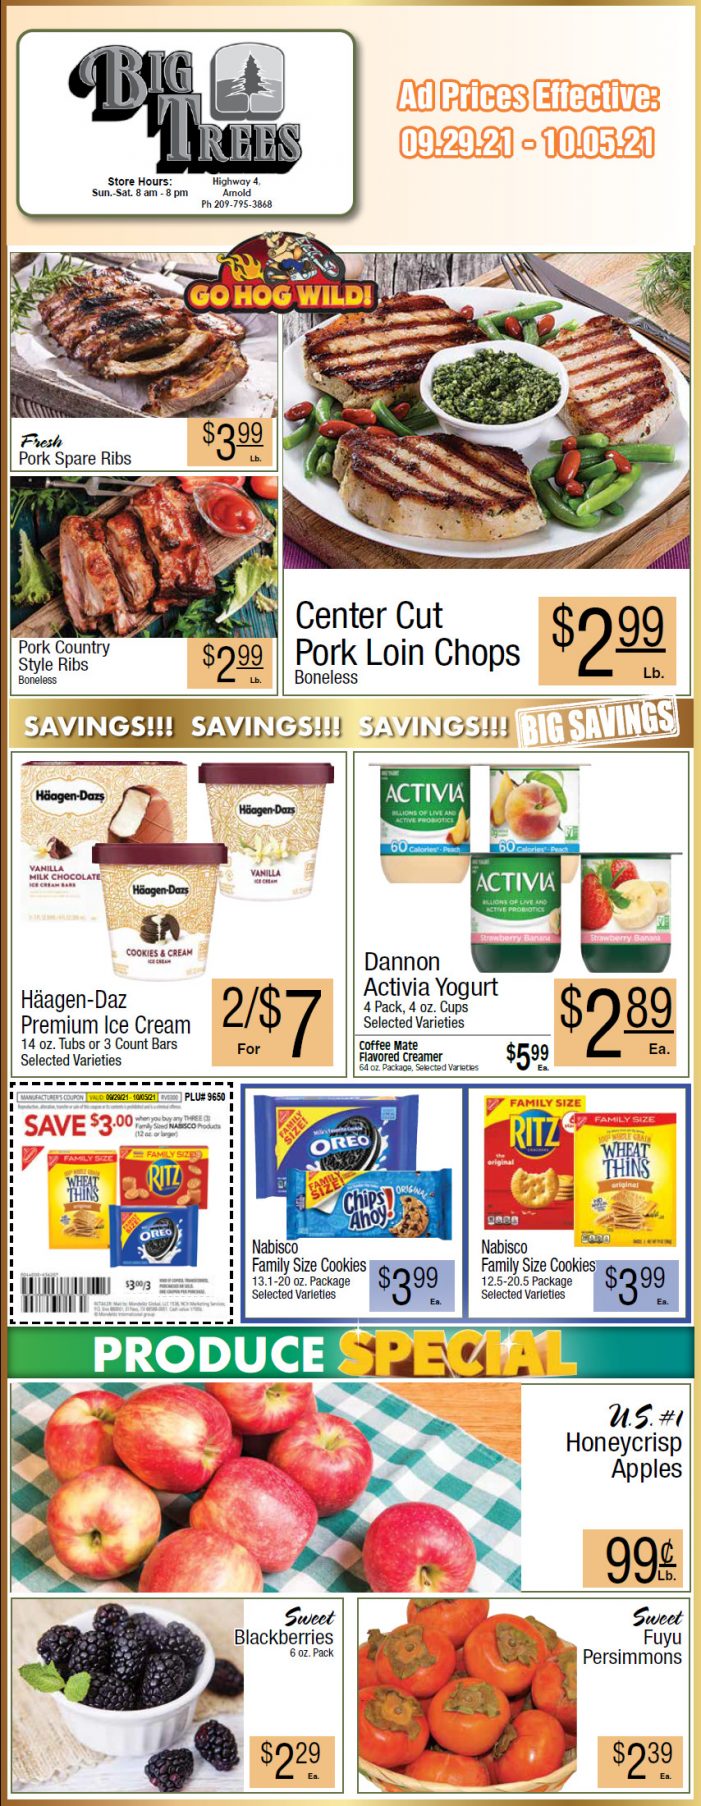 Big Trees Market Weekly Ad & Grocery Specials Through October 5th! Shop Local & Save!!